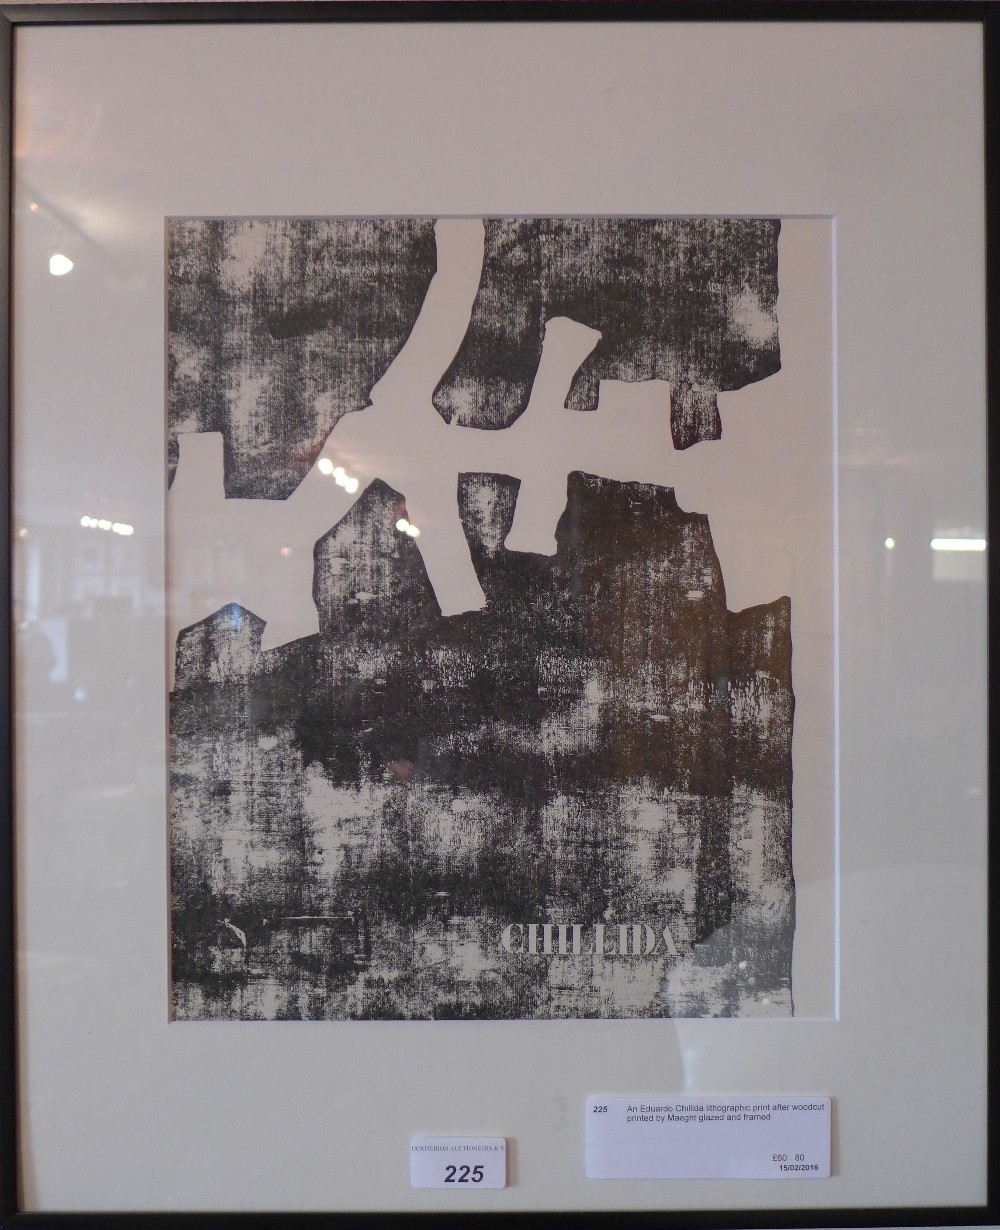 An Eduardo Chillida lithographic print after woodcut printed by Maeght glazed and framed - Image 2 of 2